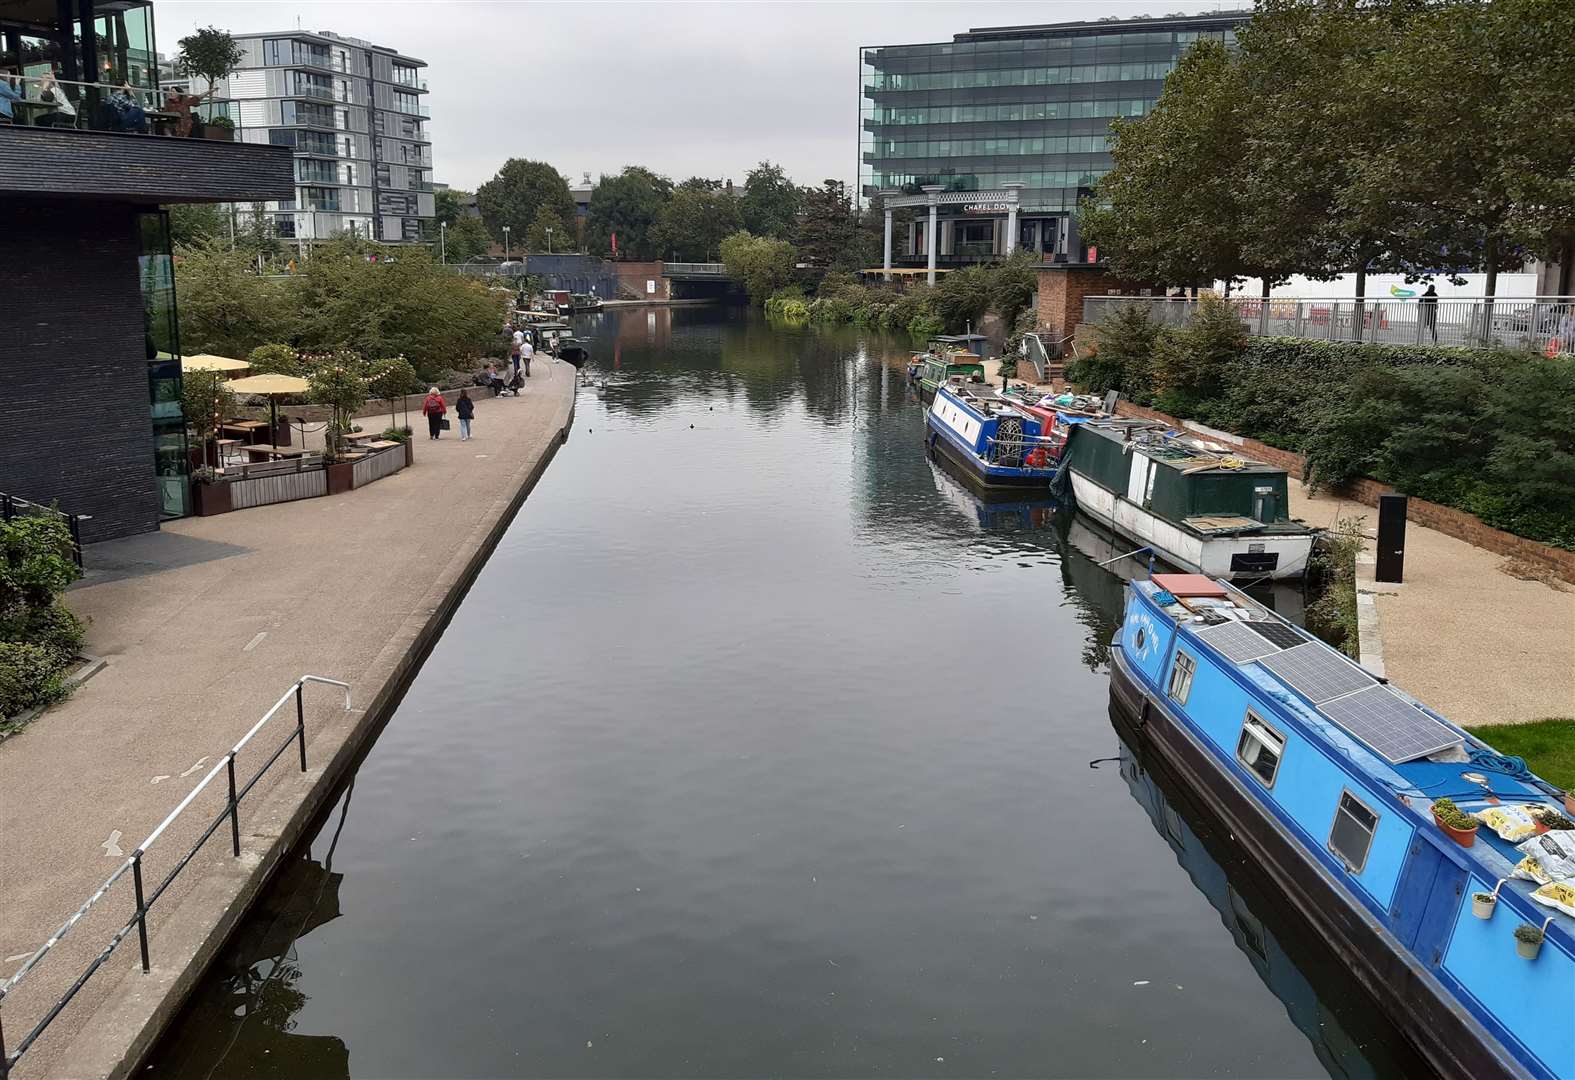 Regent's Canal which flows through Kings Cross